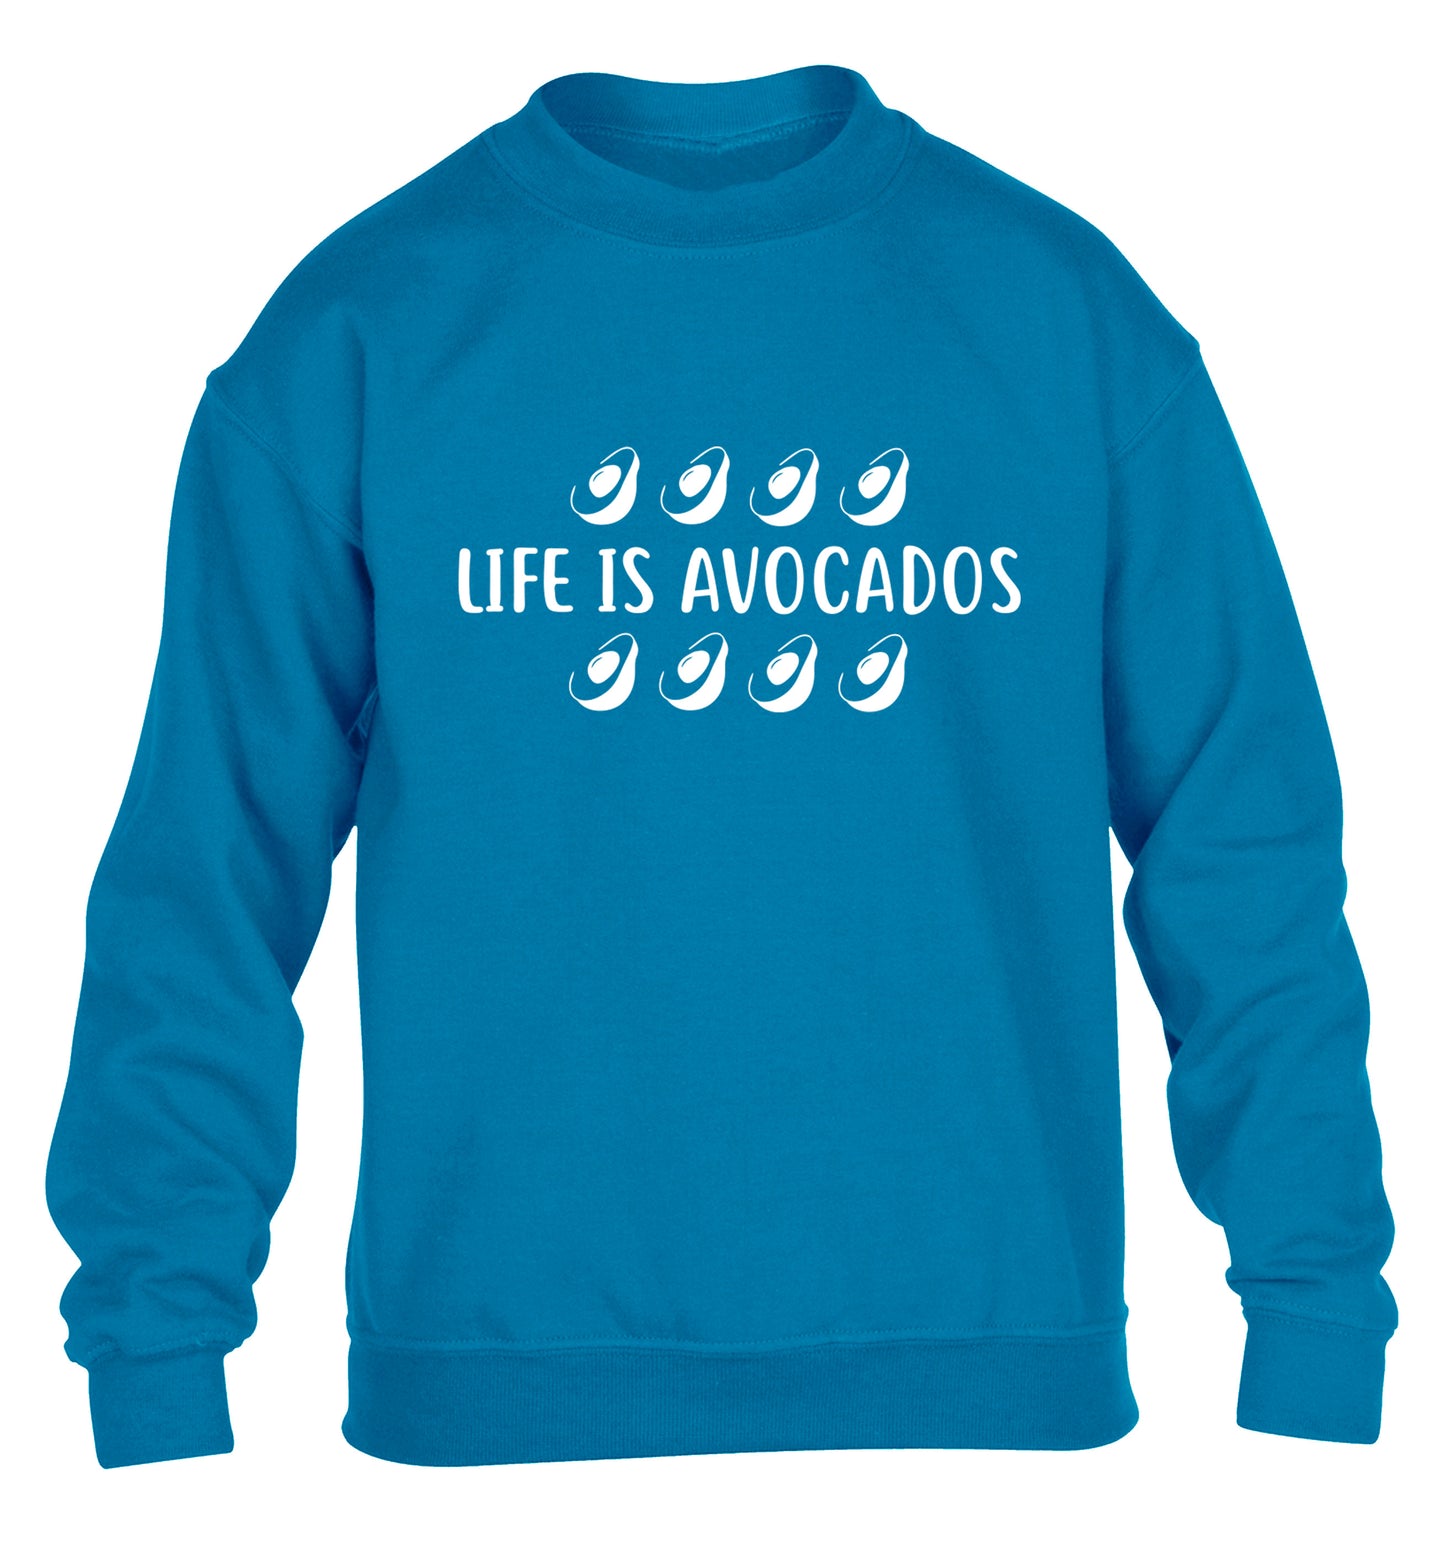 Life is avocados children's blue sweater 12-14 Years